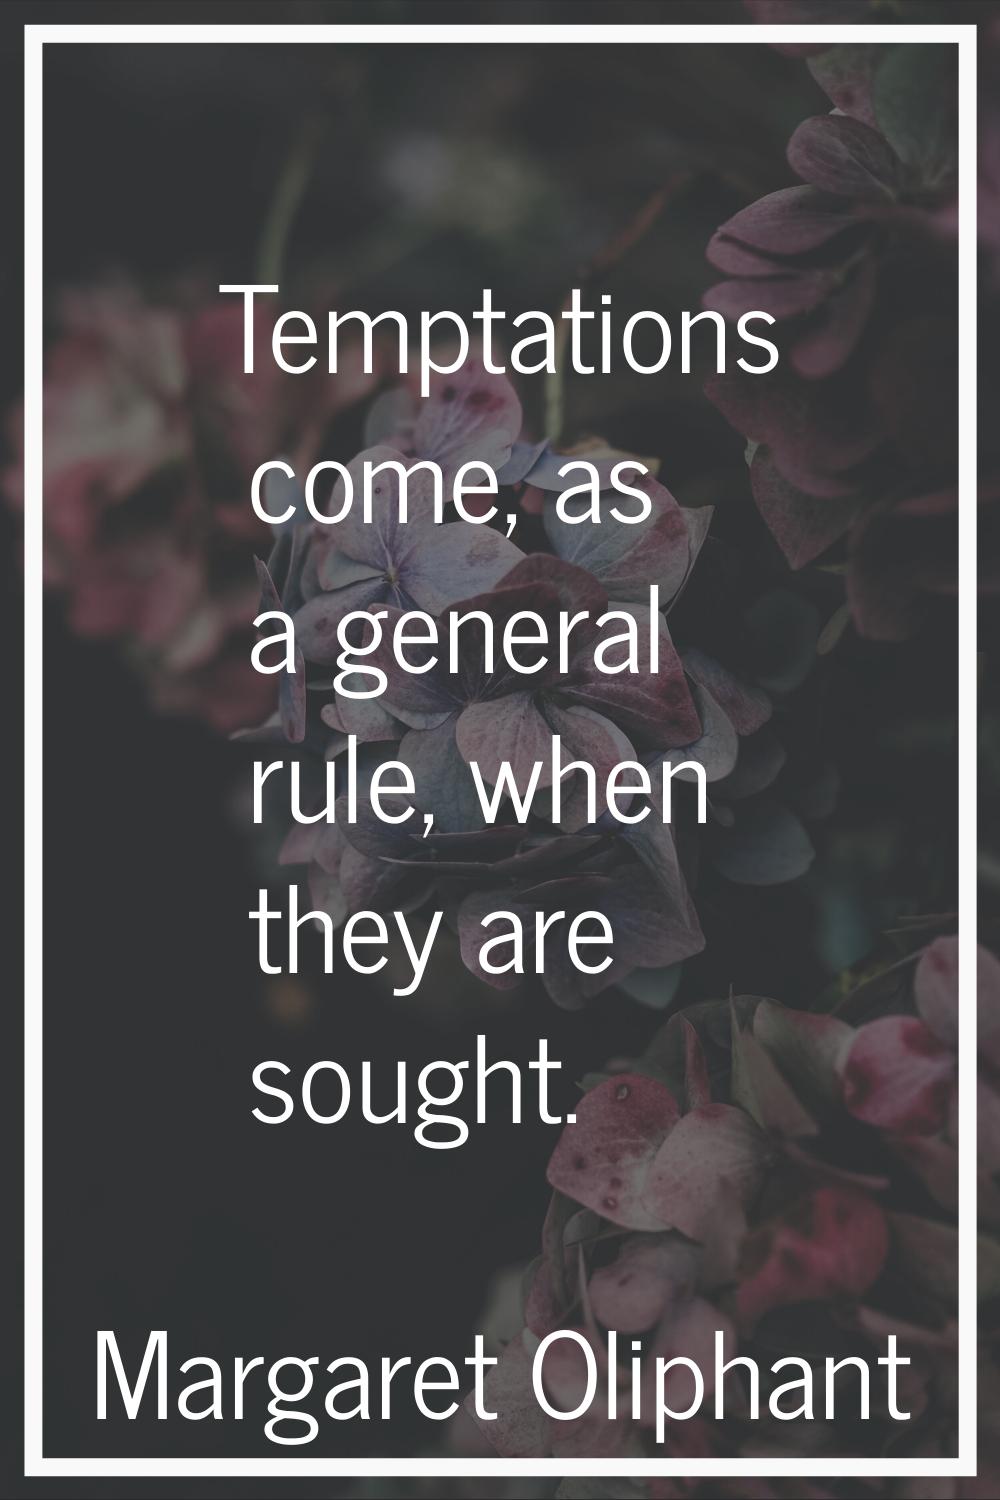 Temptations come, as a general rule, when they are sought.